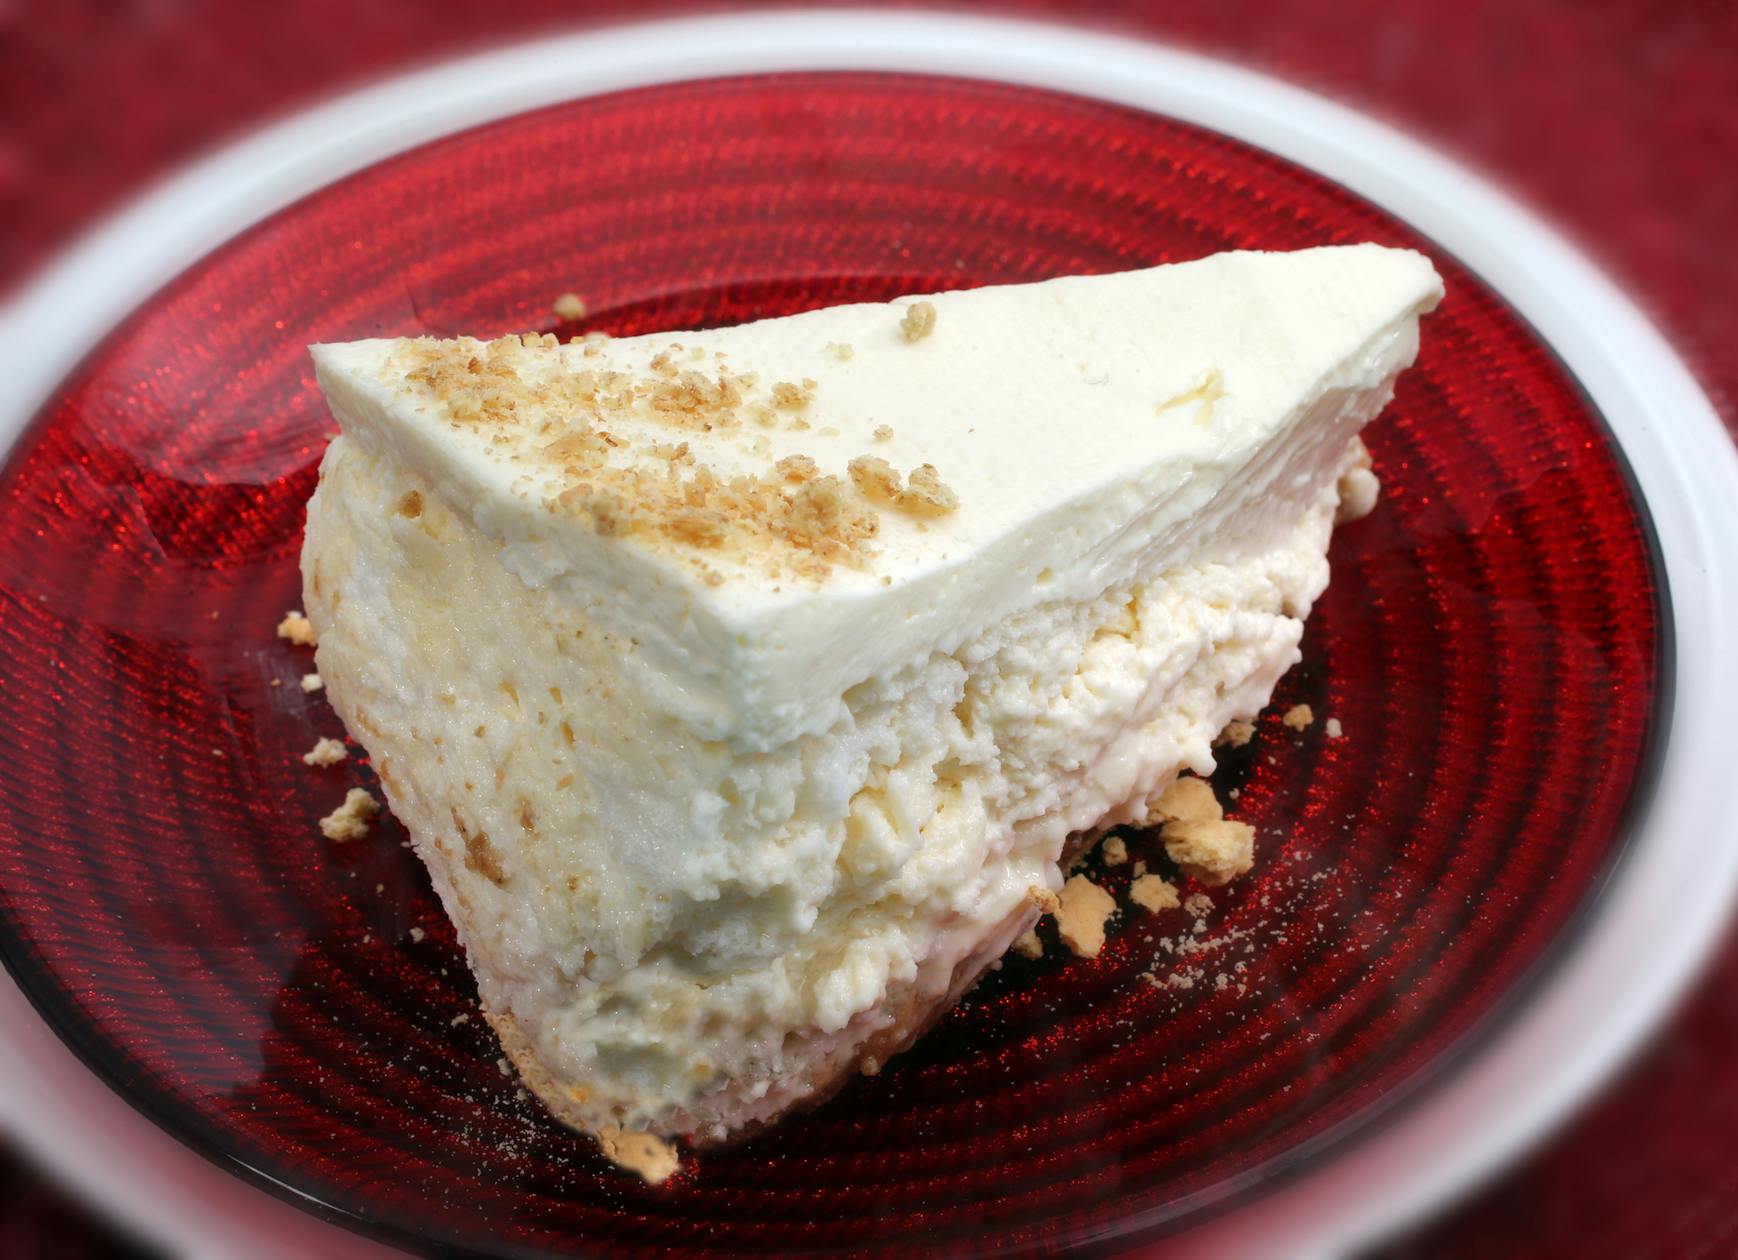 Valentine's treat: Make this spectacular cheesecake for your sweetie